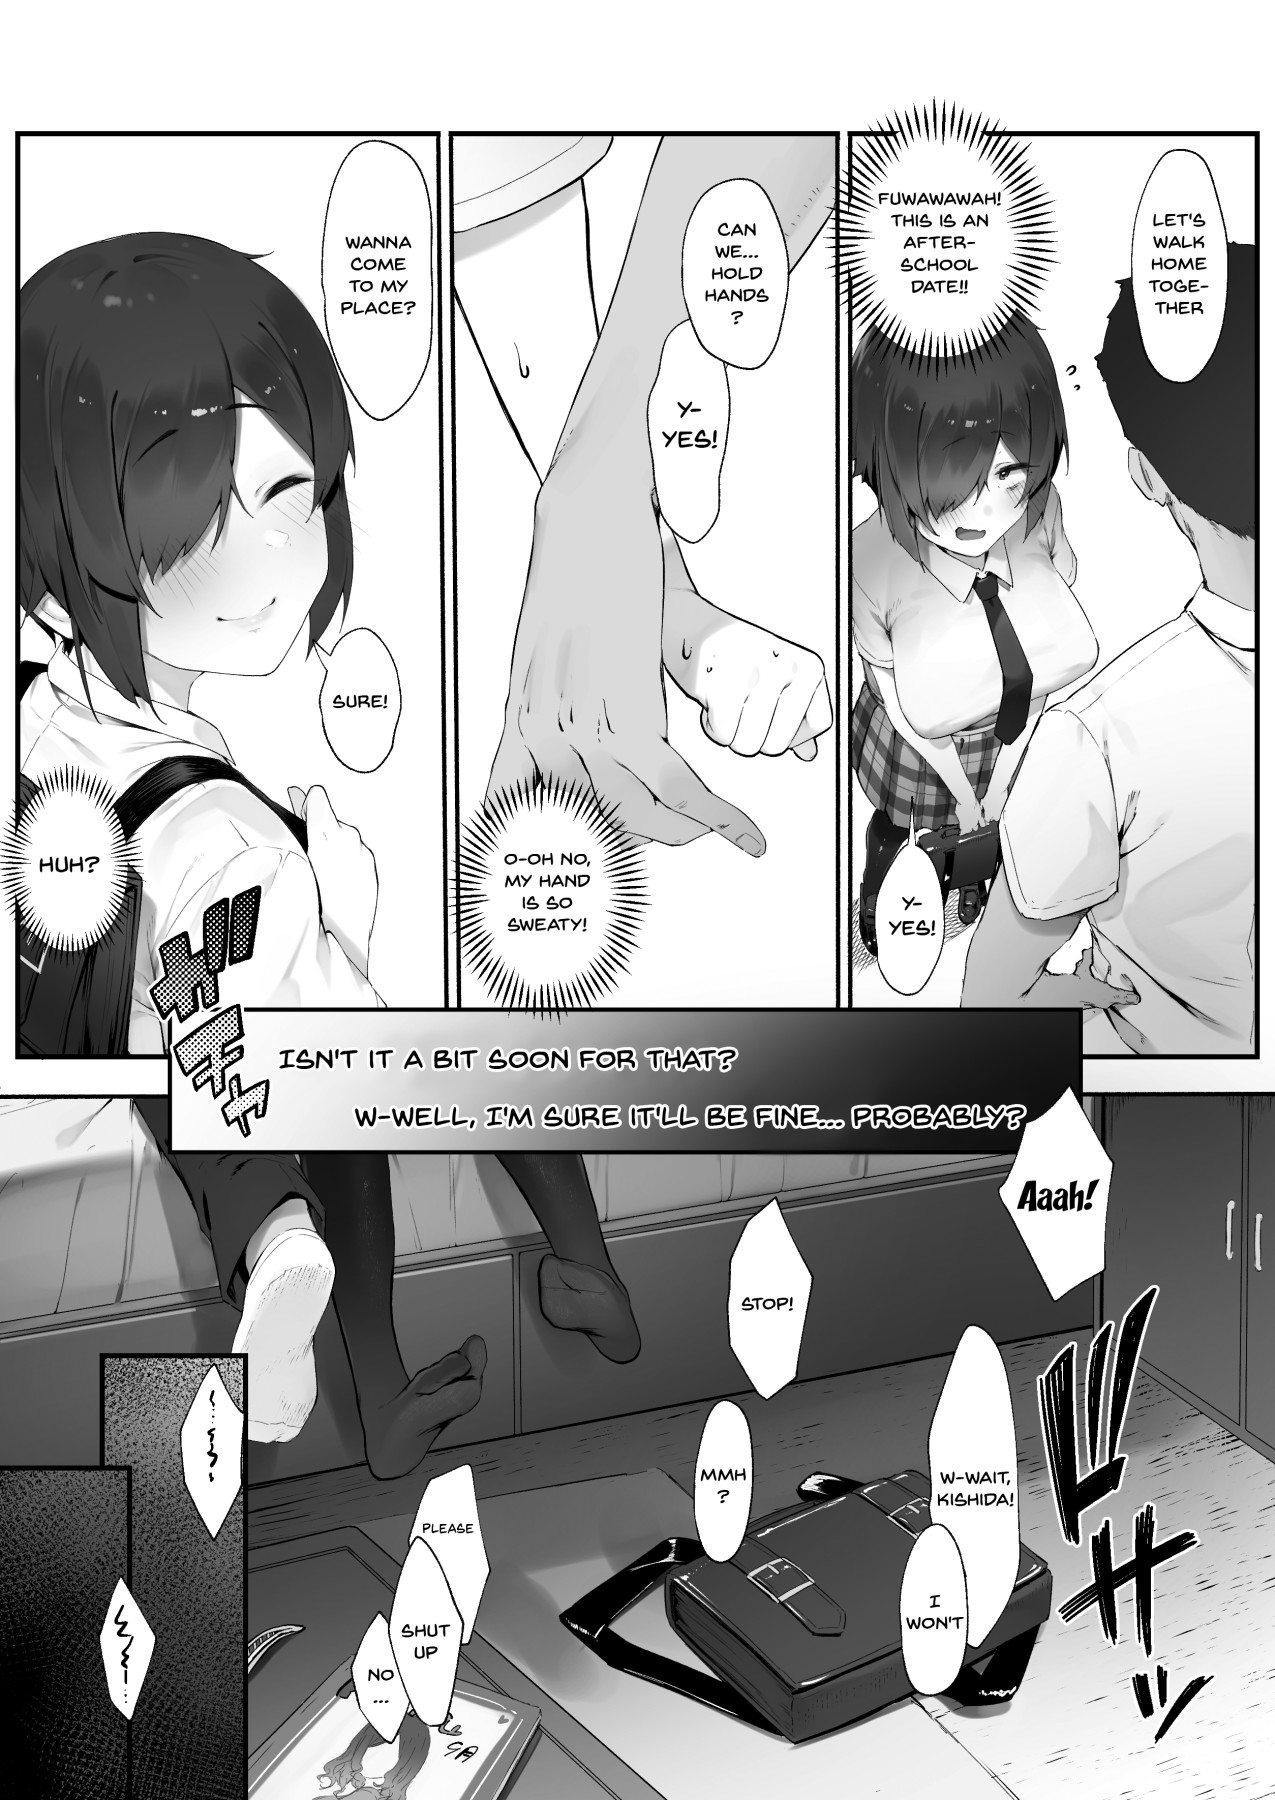 hentai manga The Springtime Of Youth Has Come For Me An Asocial Person - Continued (Full)